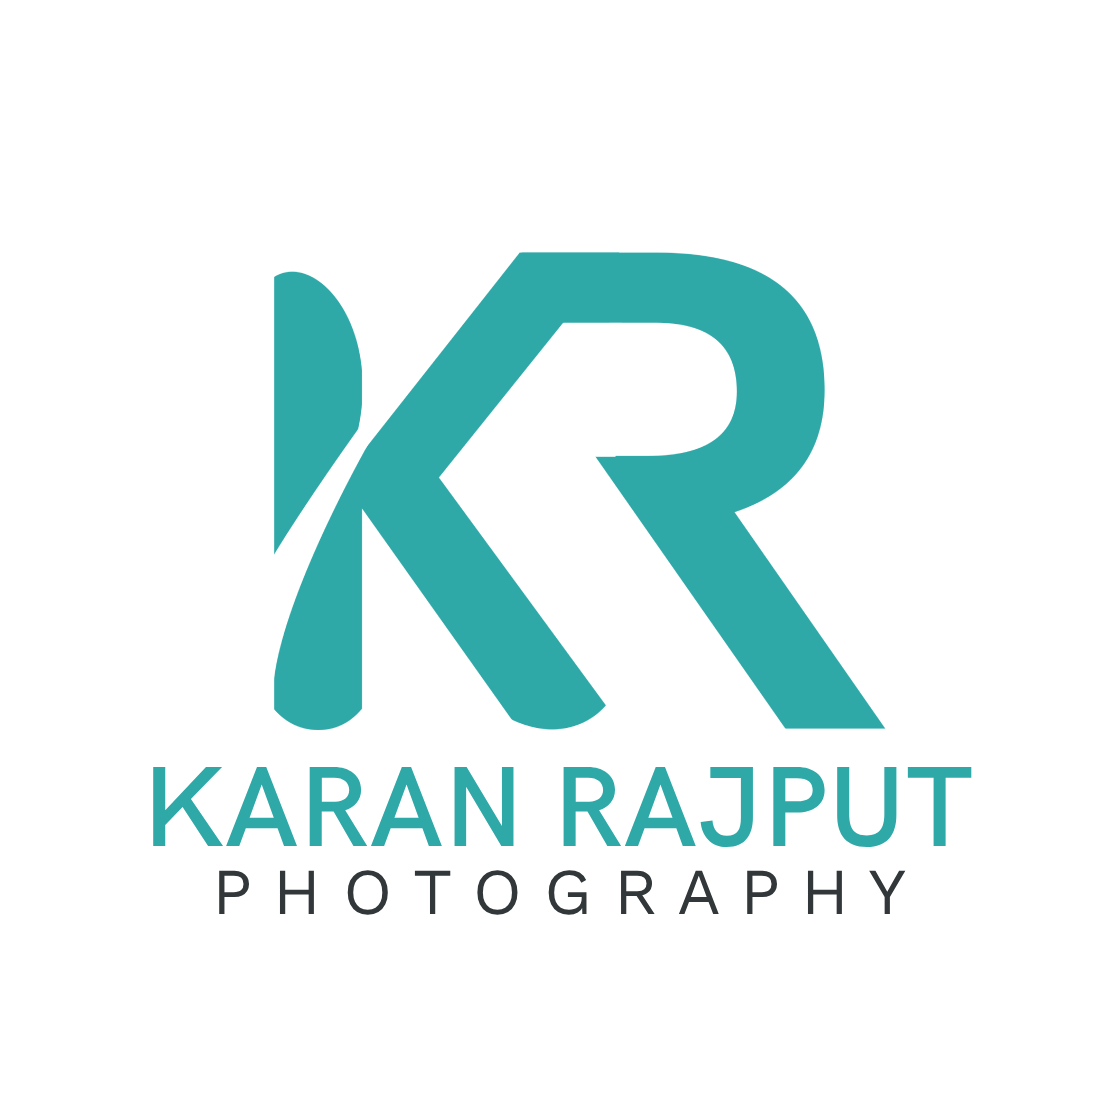 I will professional photography logo design cover image.